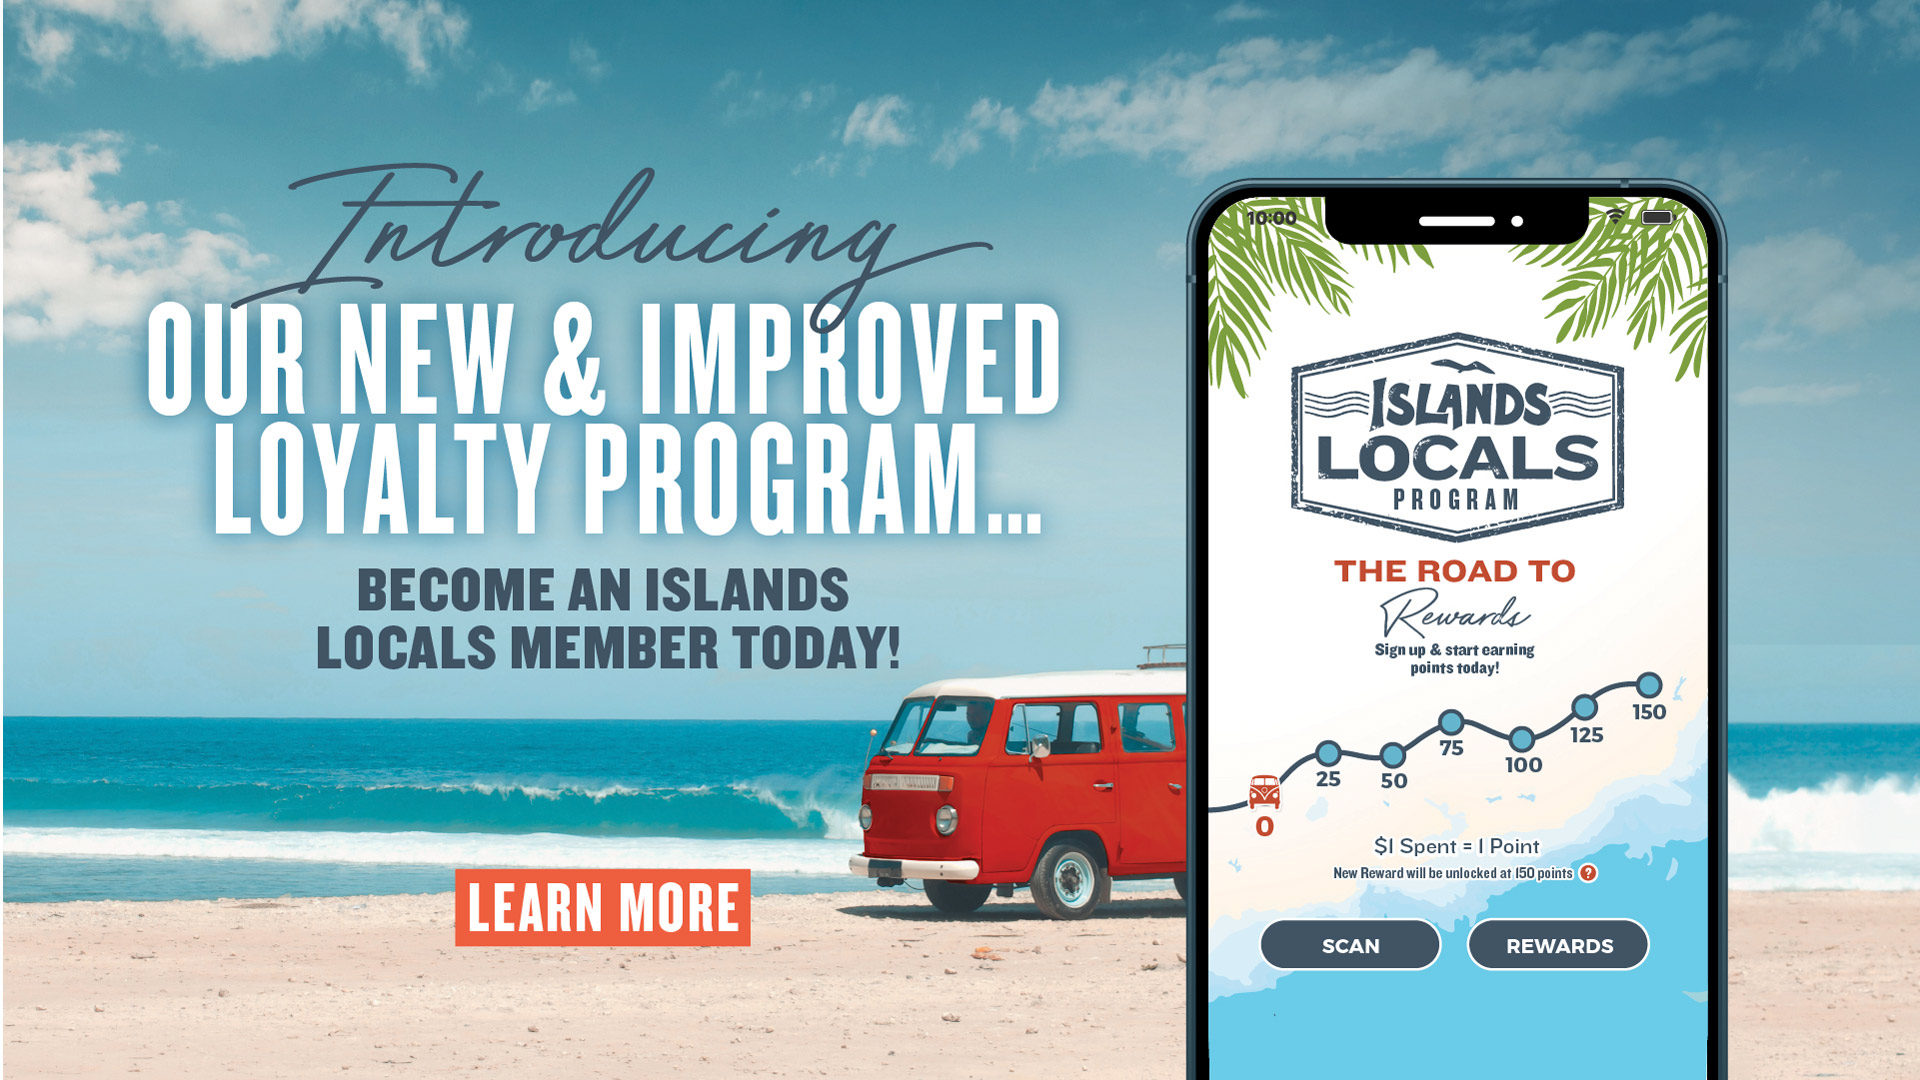 Introducing our new & improved loyalty program... become an islands locals member today! Learn More.